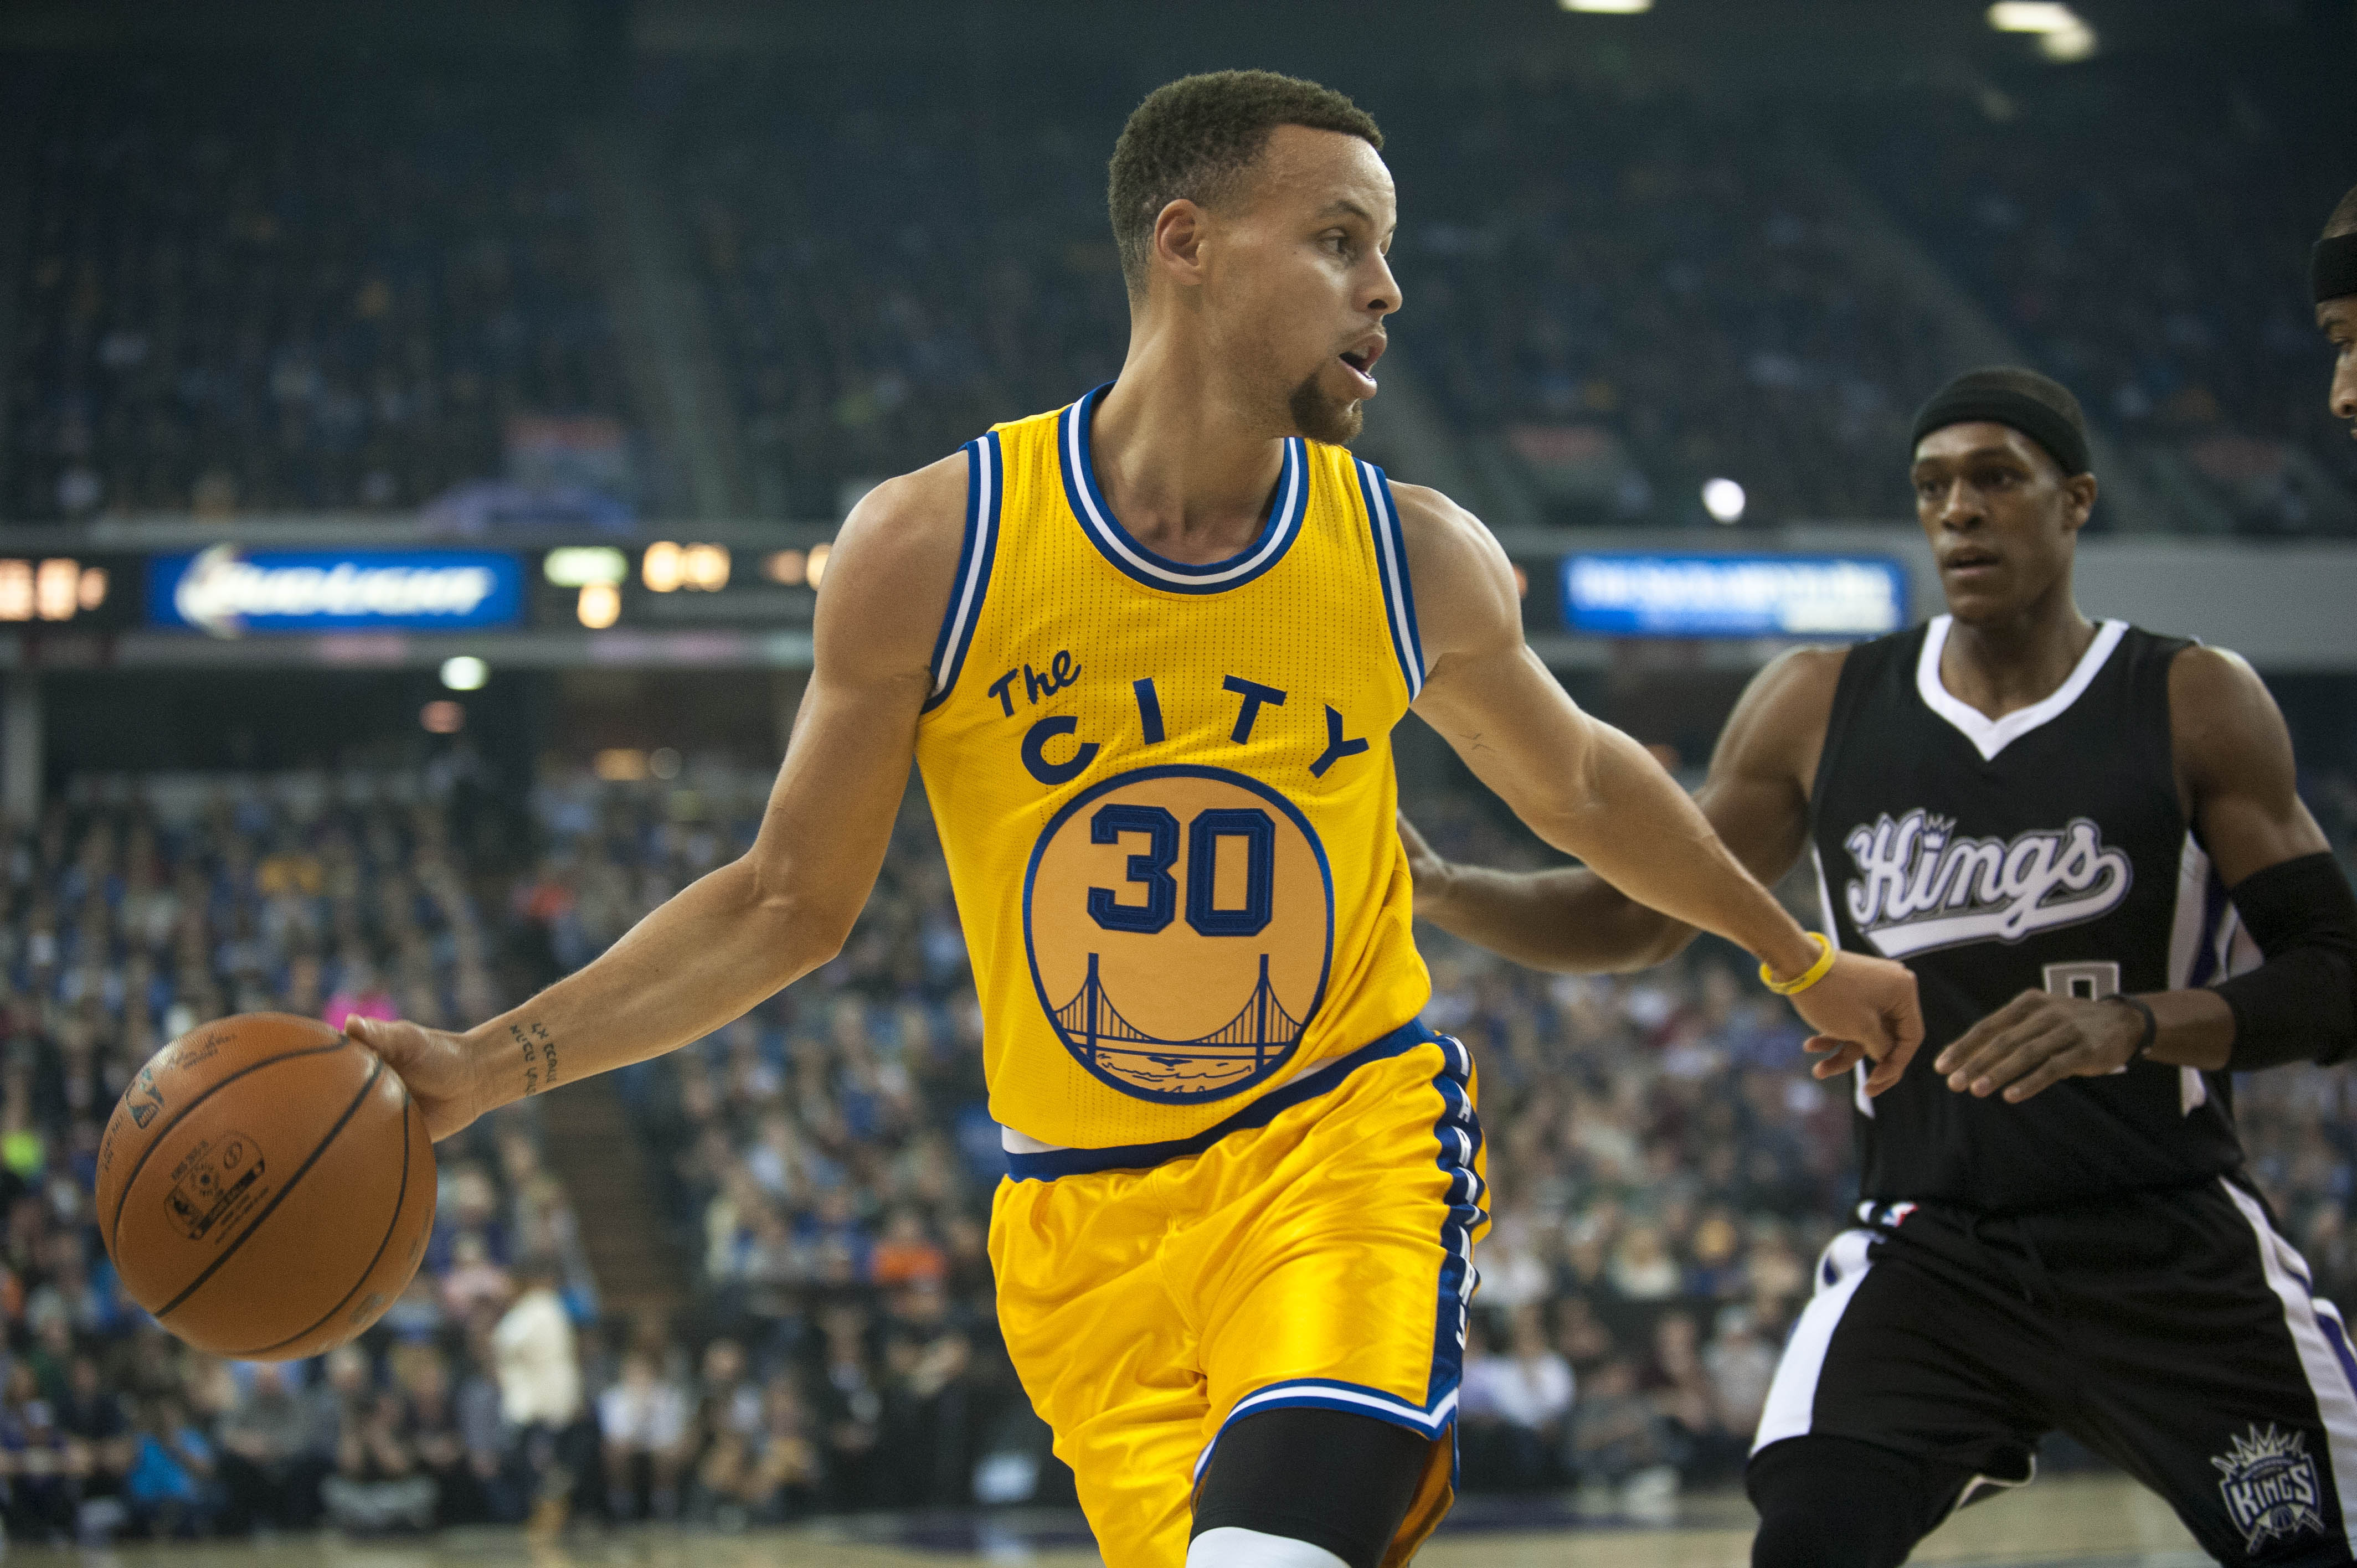 Steph Curry's Father NBA Vet Dell Curry Talks Son's 'God-Given' Abilities